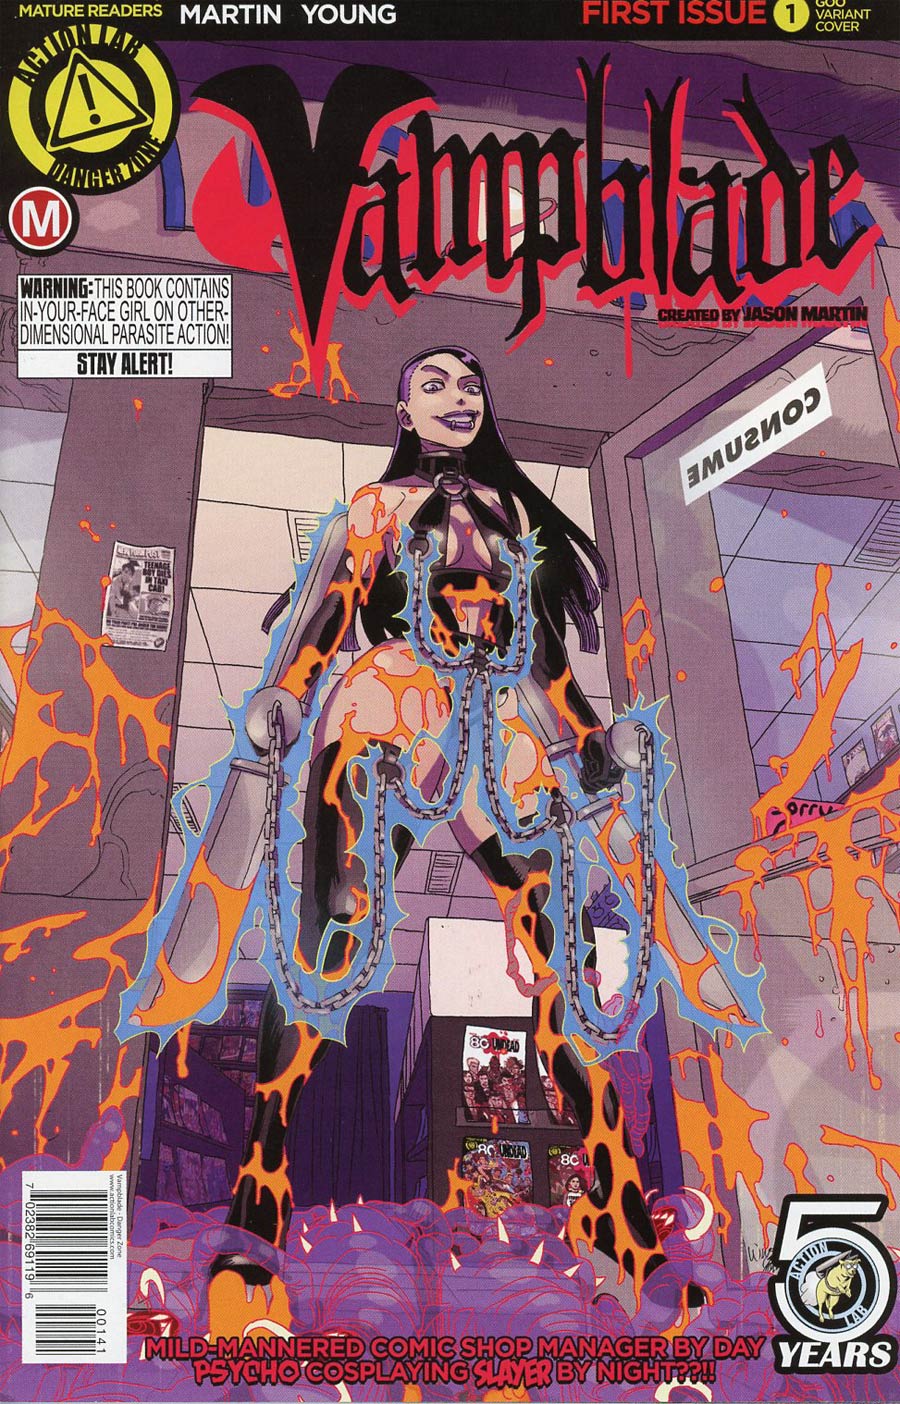 Vampblade #1 Cover F Incentive Winston Young Goo Variant Cover